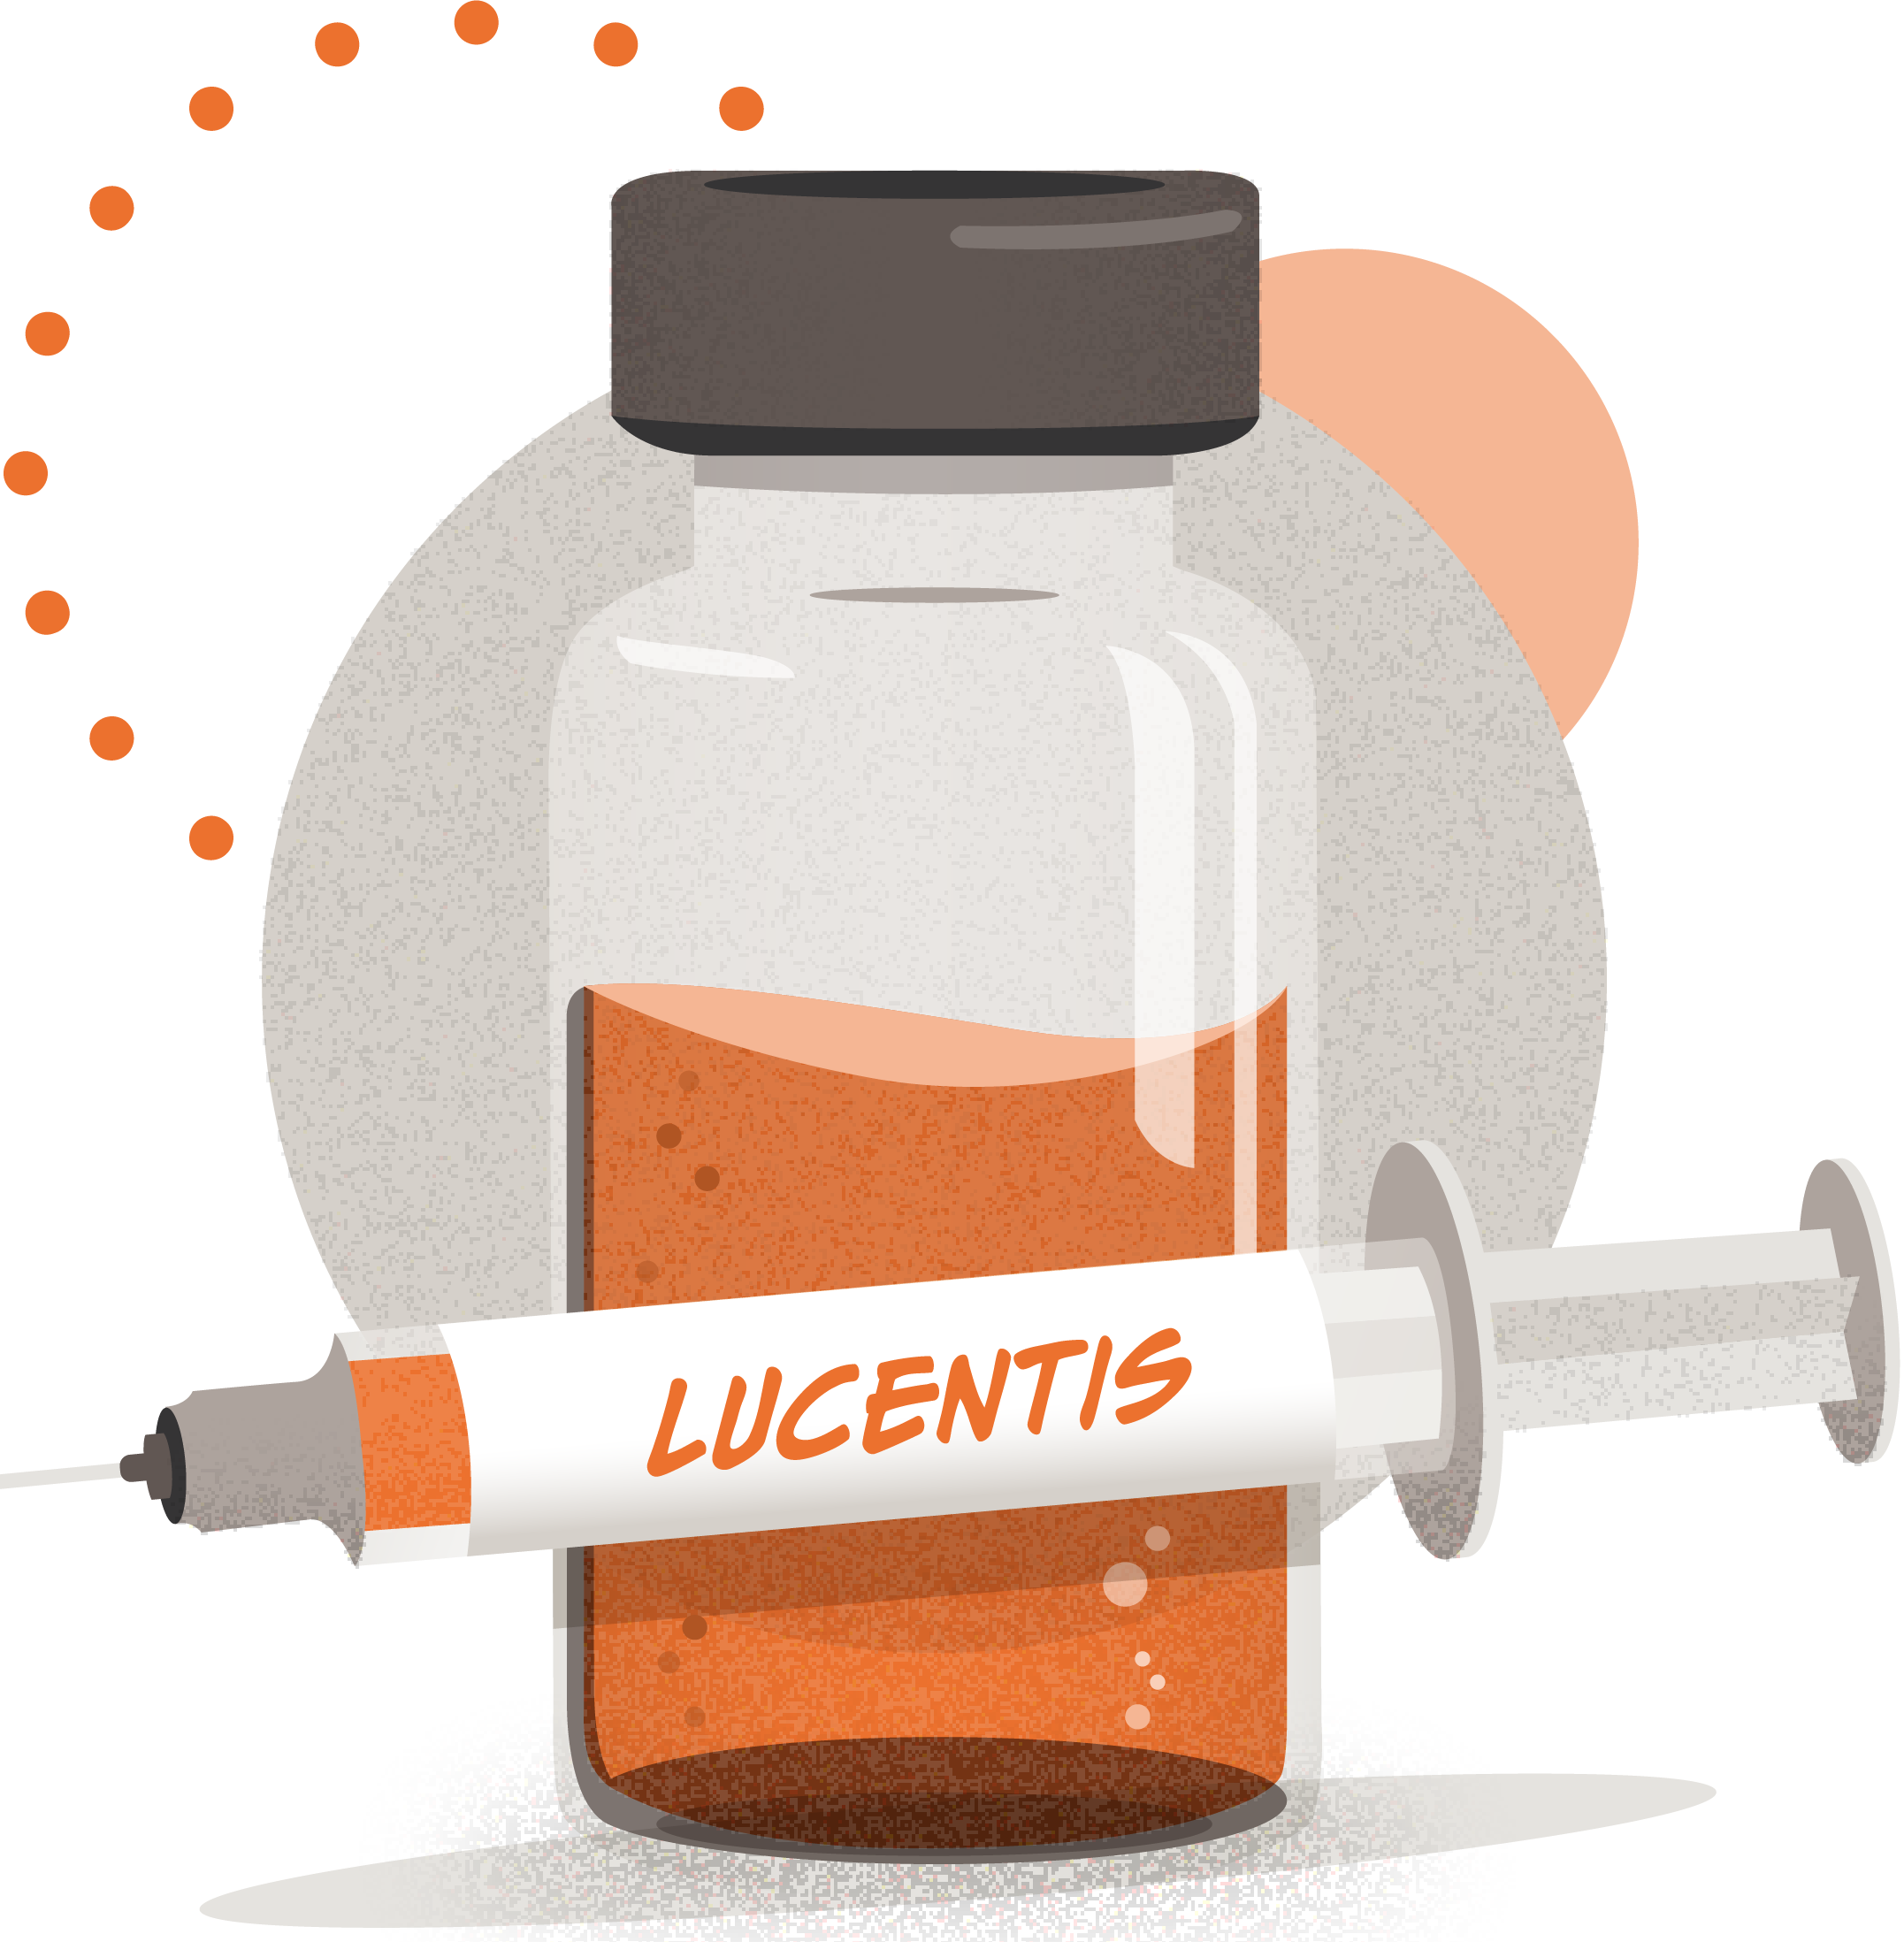 Illustration of a syringe and vial of Lucentis, a drug used to treat the eye condition, wet age-related macular degeneration, as an example of an on-label prescription.